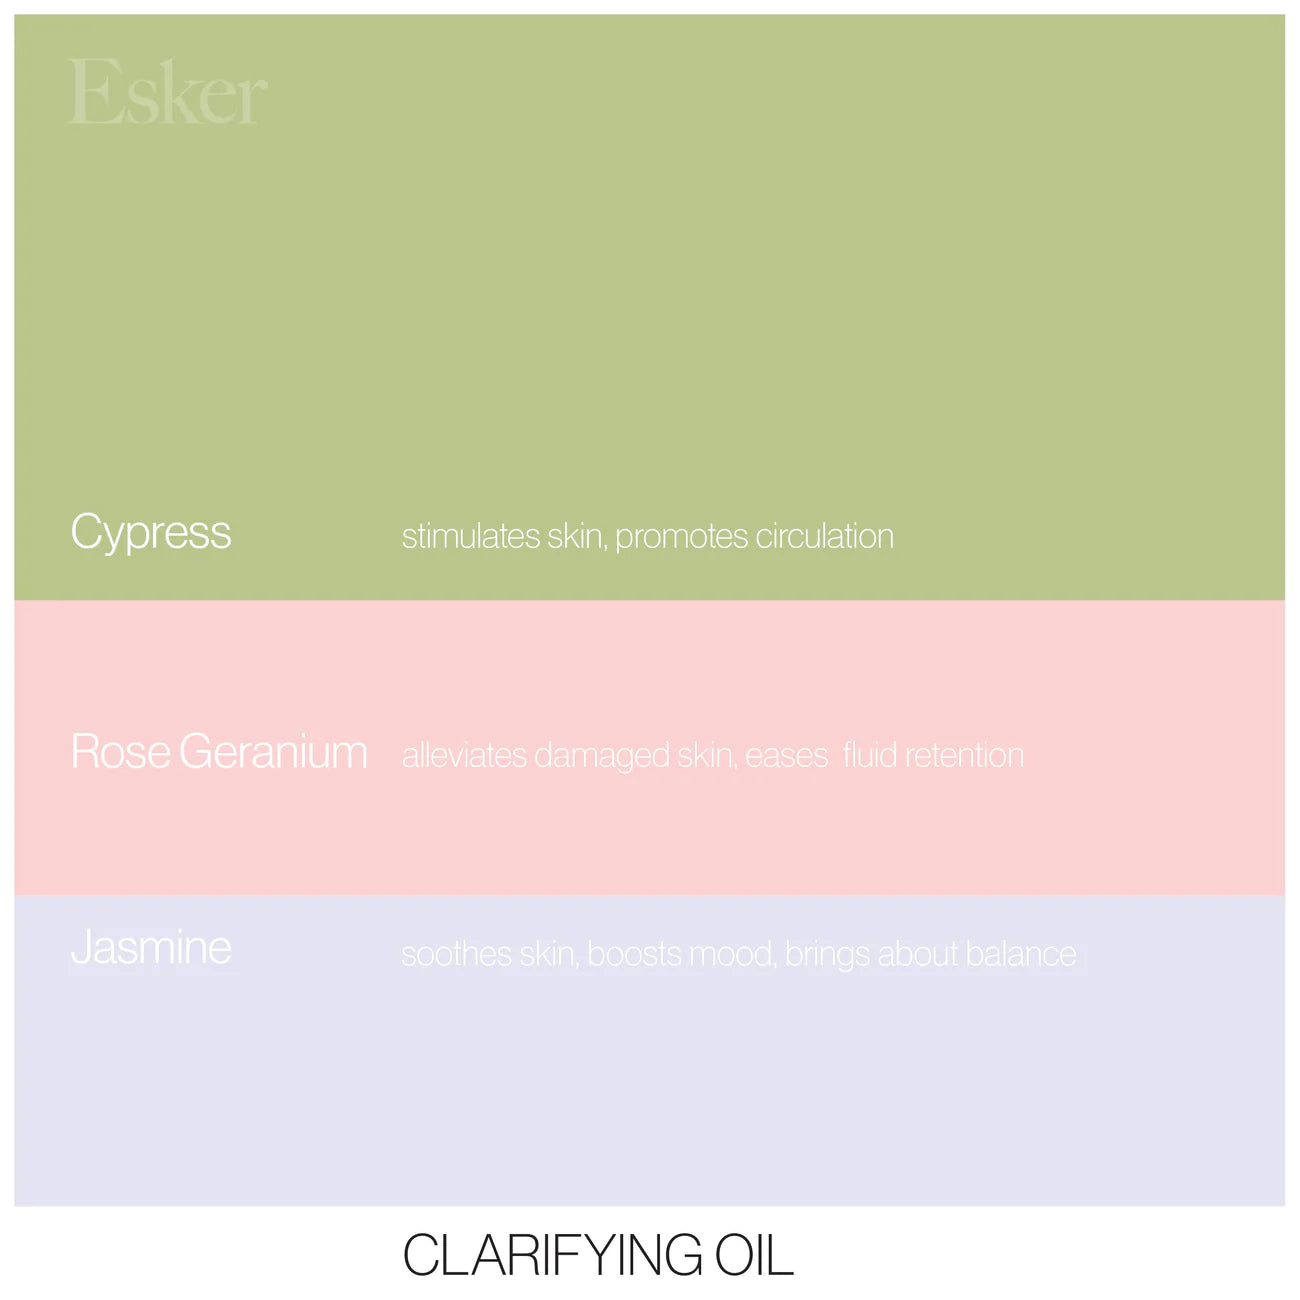 Load image into Gallery viewer, Esker Clarifying Body Oil
